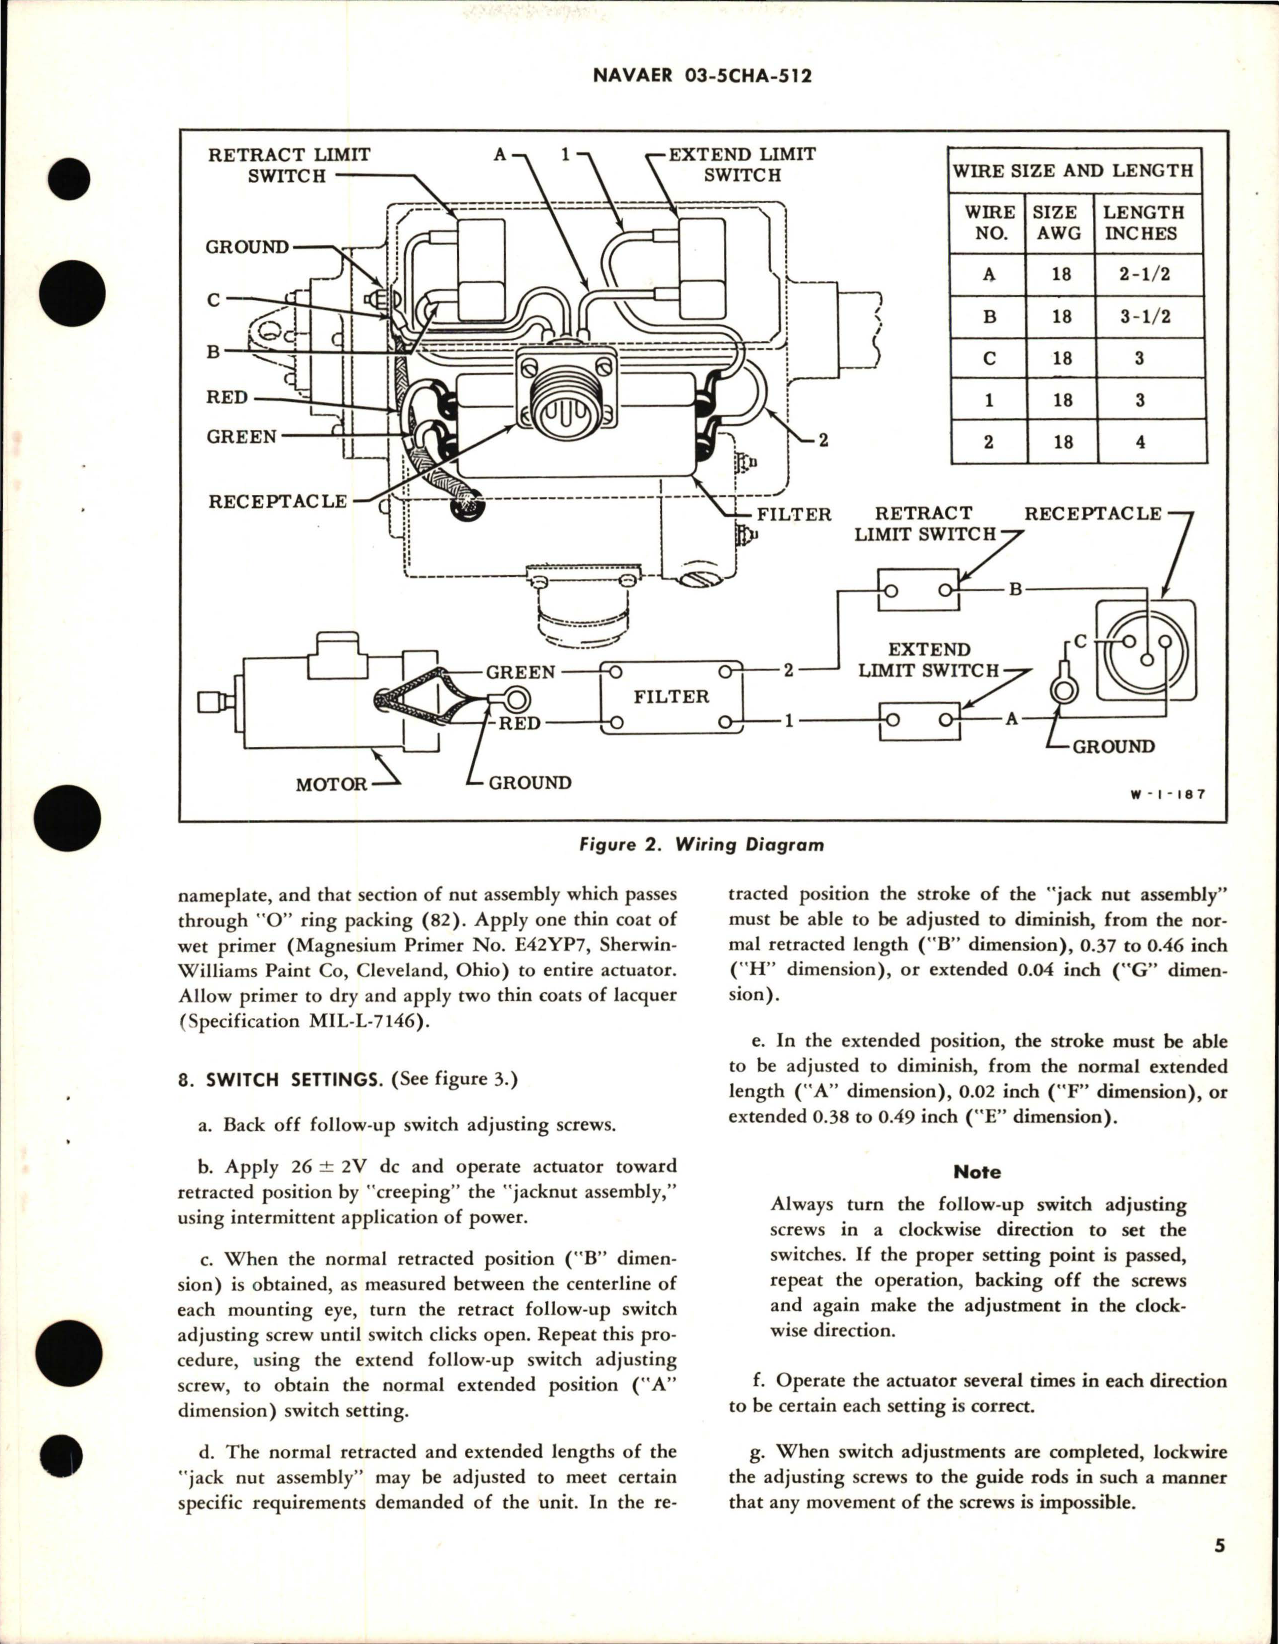 Sample page 5 from AirCorps Library document: Overhaul Instructions with Parts Breakdown for Electromechanical Linear Actuator - Part 31798-2 - Model ELA3-112 